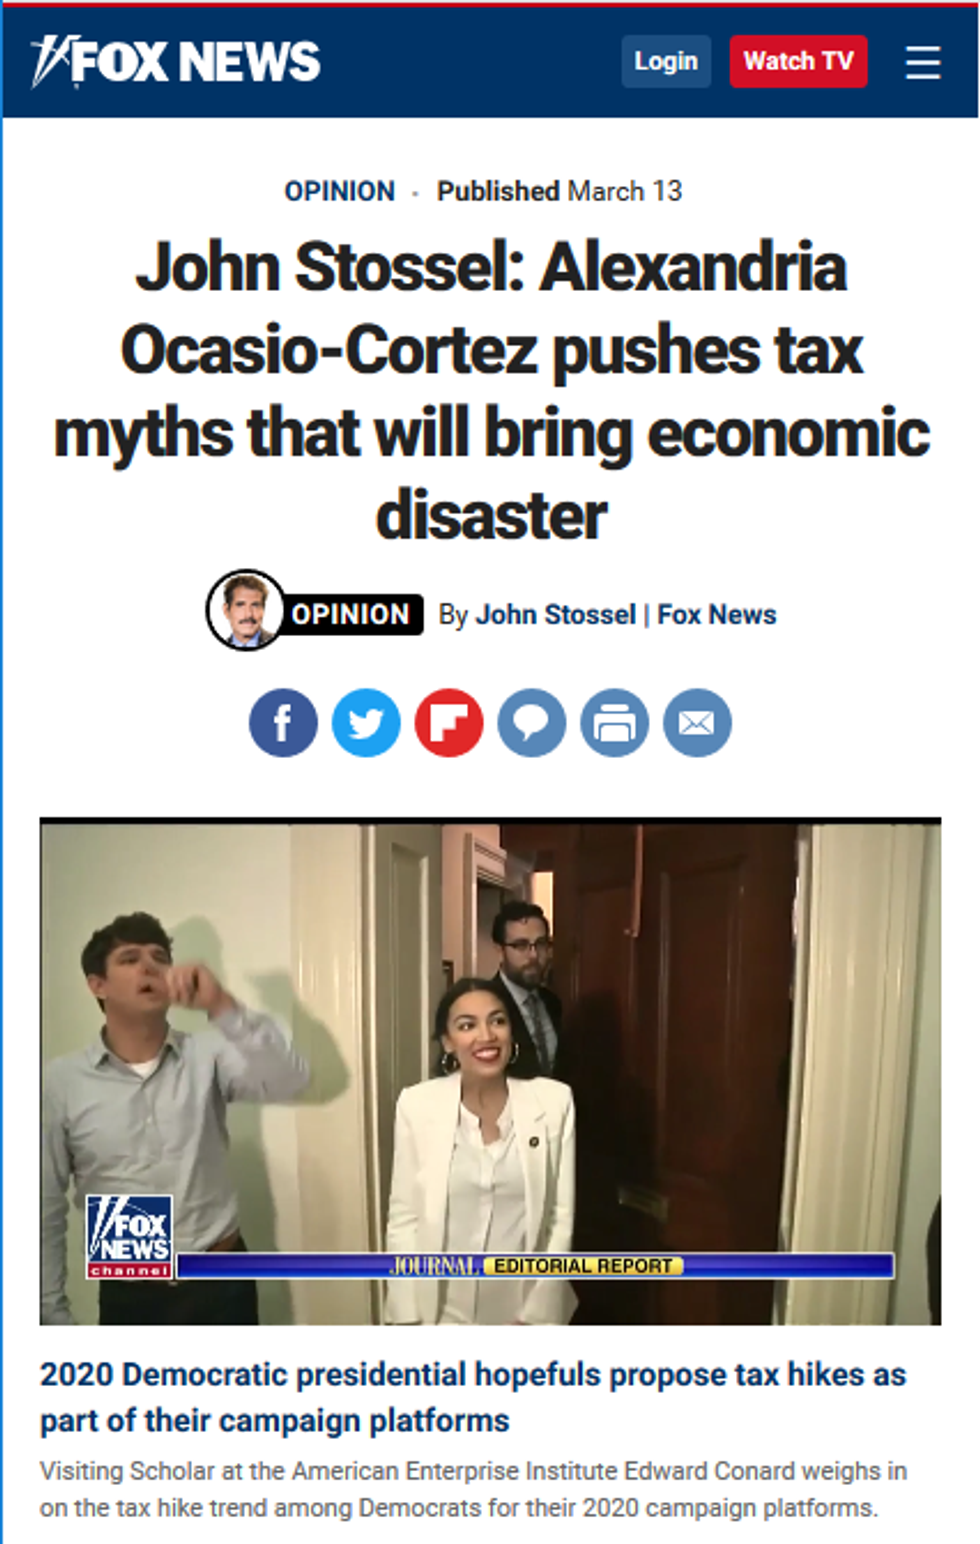 Fox: Ocasio-Cortez Pushes Tax Myths That Will Bring Economic Disaster